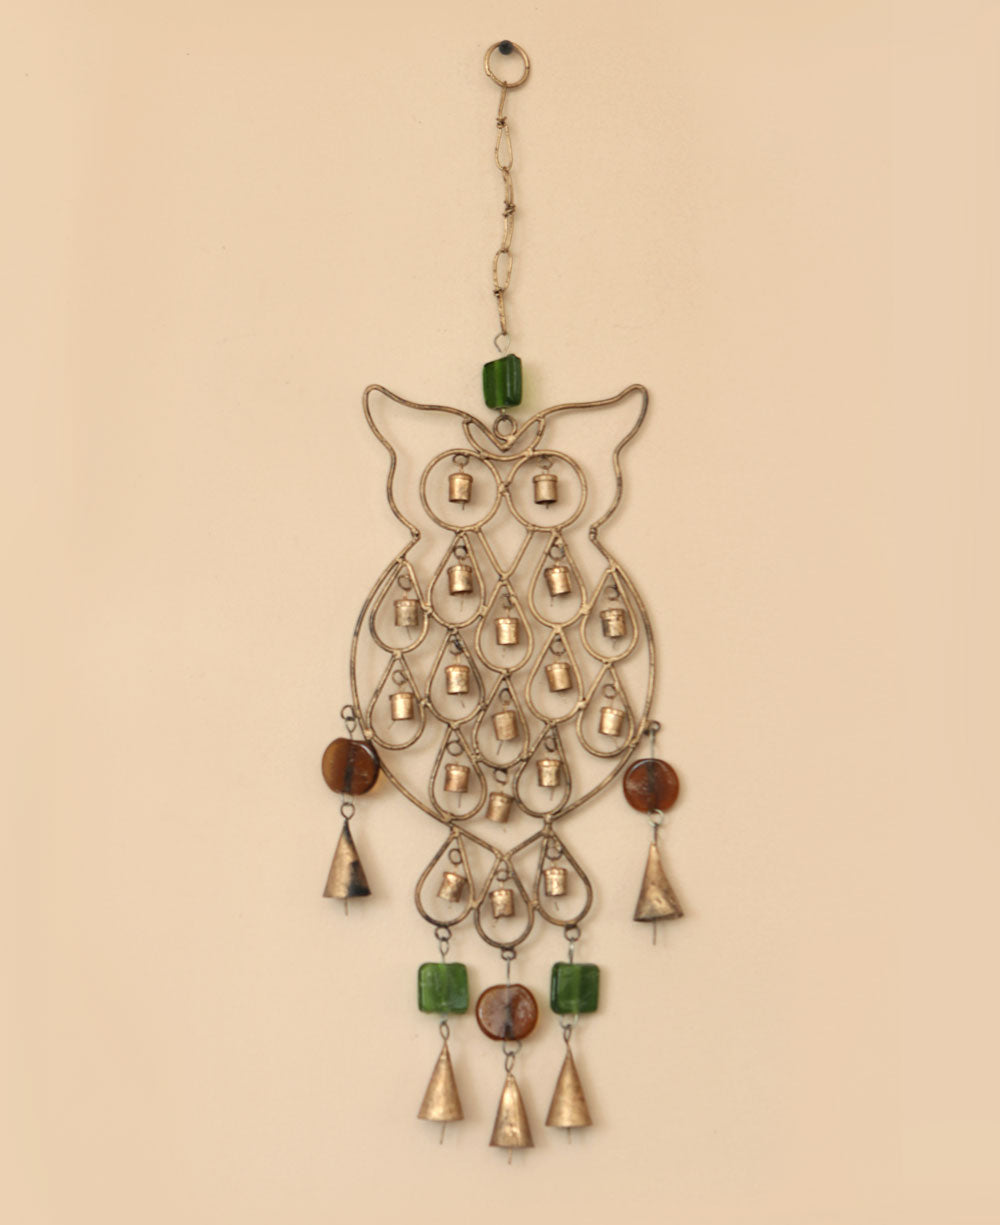 Owl Chime